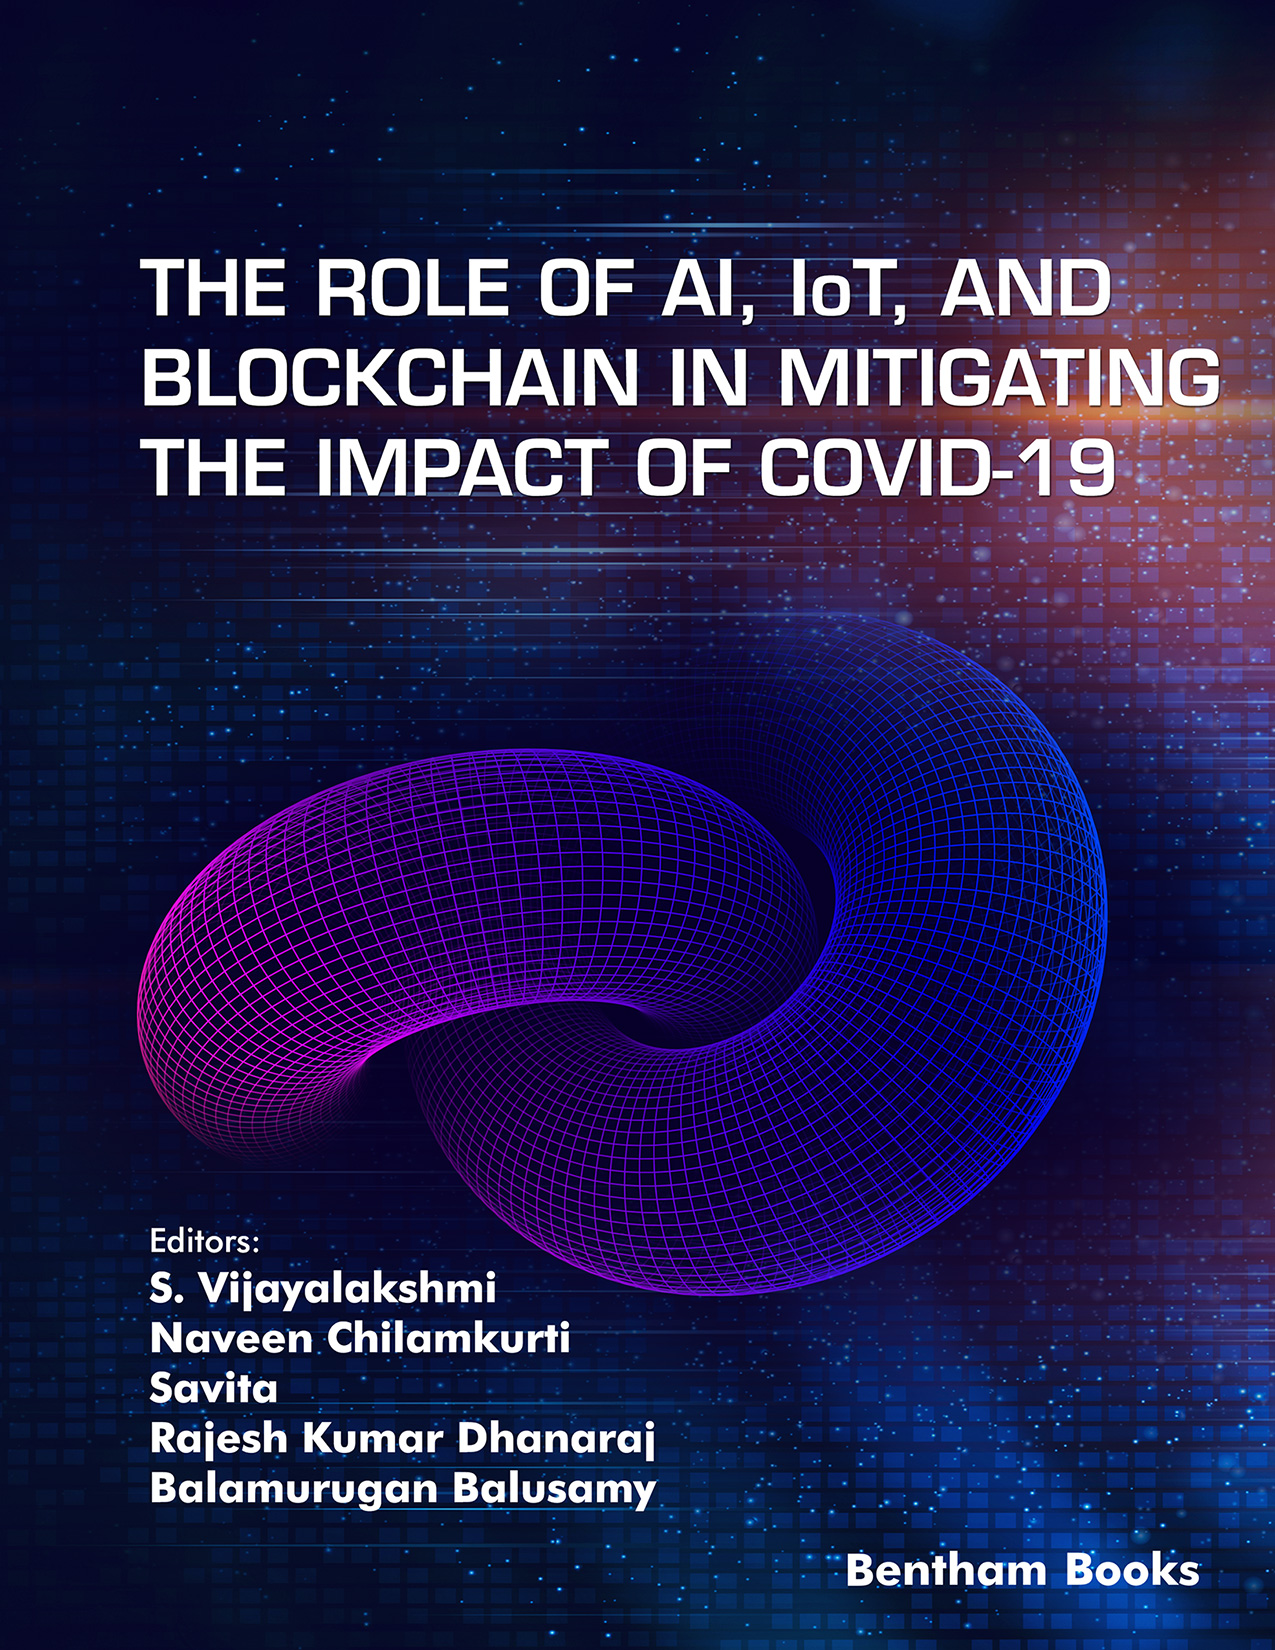 The Role of AI, IoT, and Blockchain in Mitigating the Impact of COVID-19